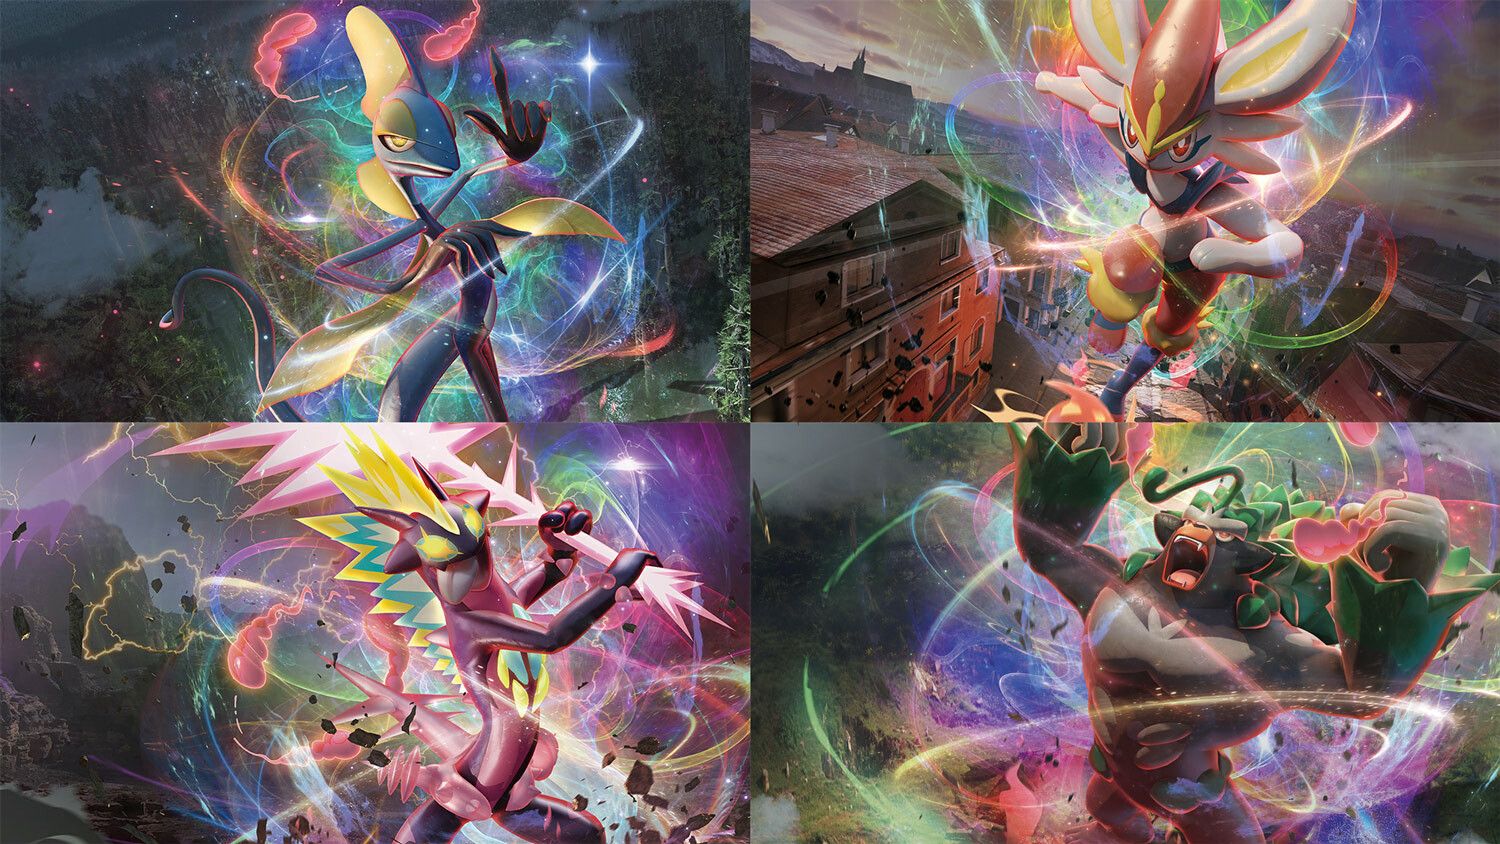 Download Rebel Clash Wallpaper. PokeGuardian. We Bring You the Latest Pokémon TCG News Every Day!